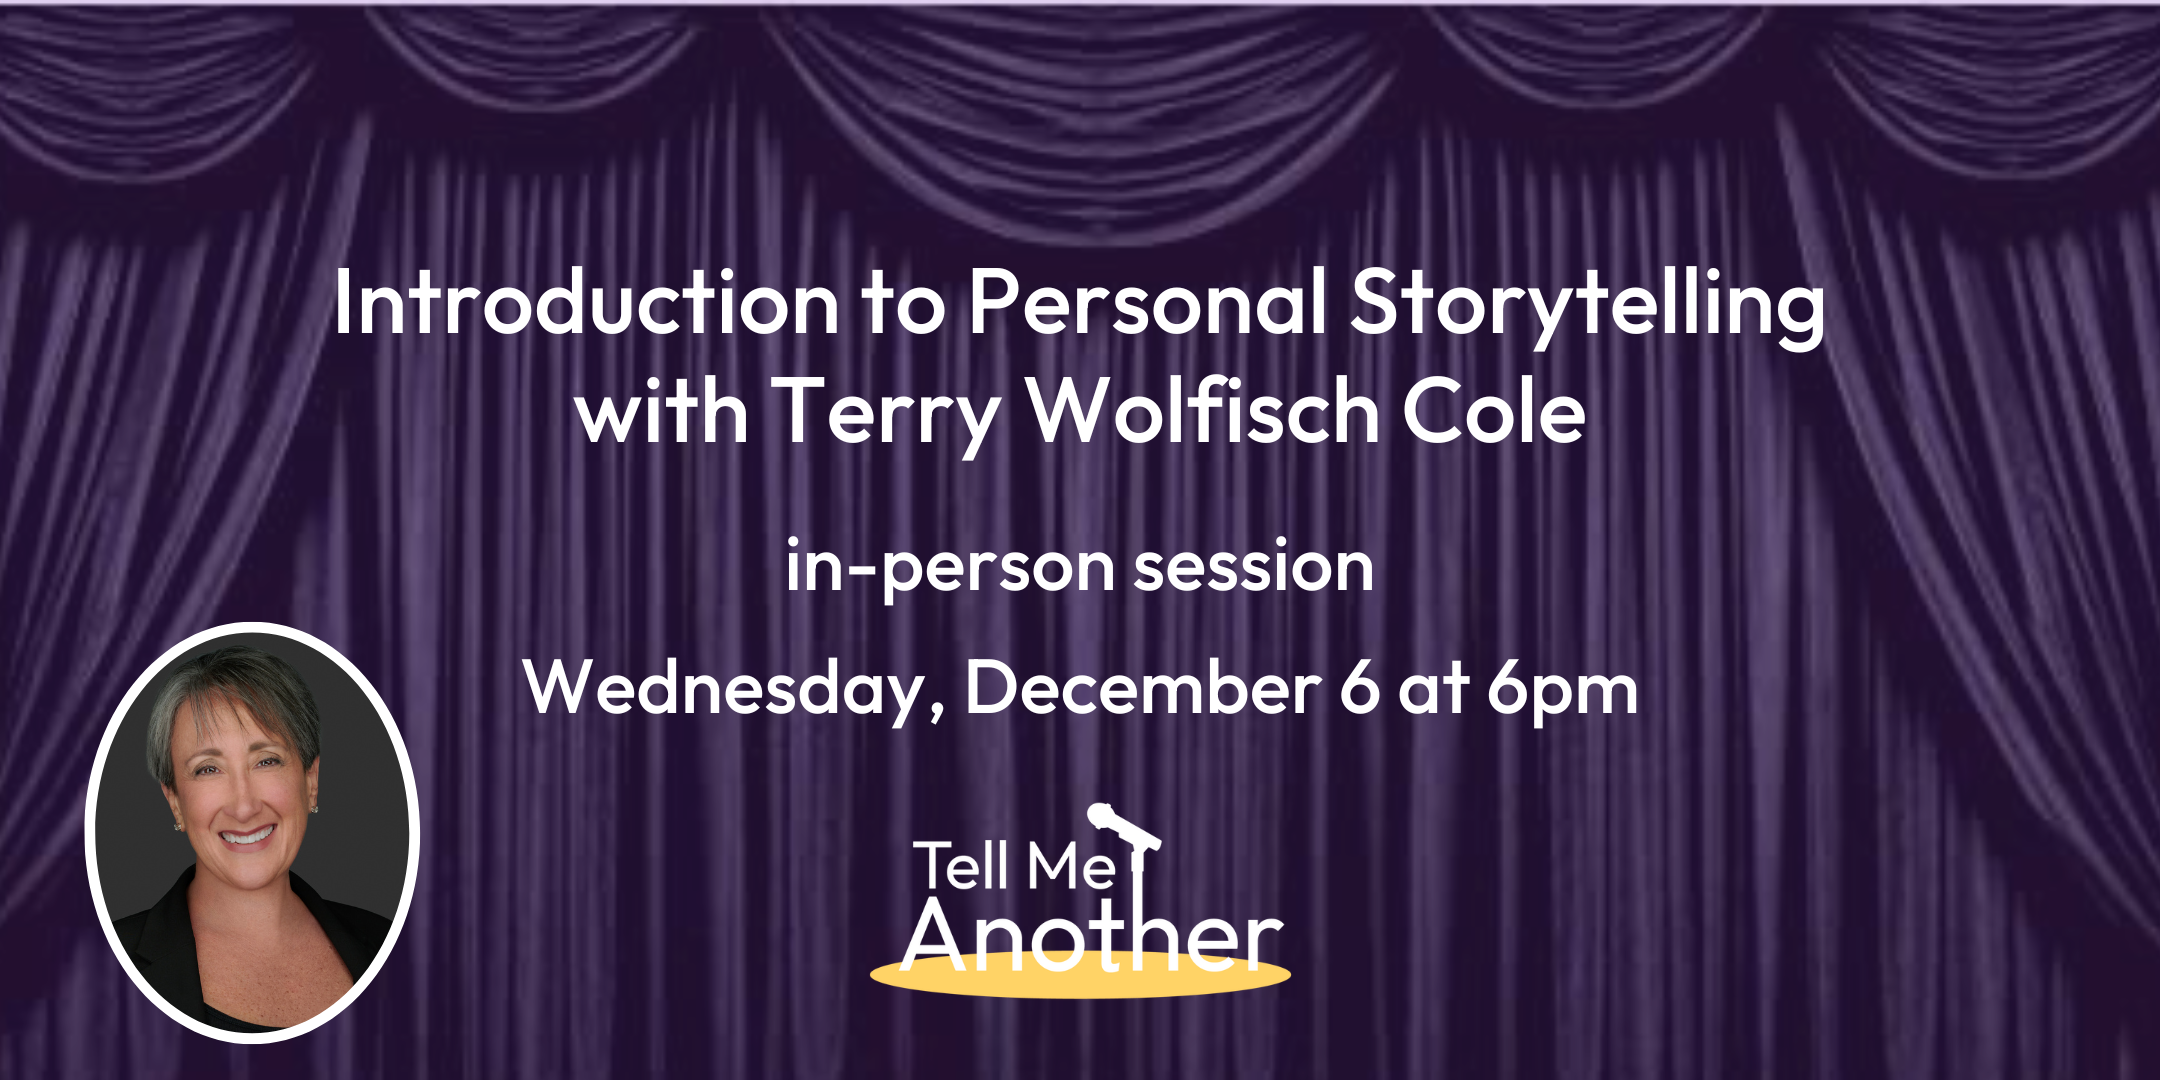 A purple curtain background with white words that say: INTRODUCTION TO PERSONAL STORYTELLING with Terry Wolfisch Cole In person session on December 6th with a small oval photo of Terry Wolfisch Cole along with the Tell Me Another Logo at the bottom